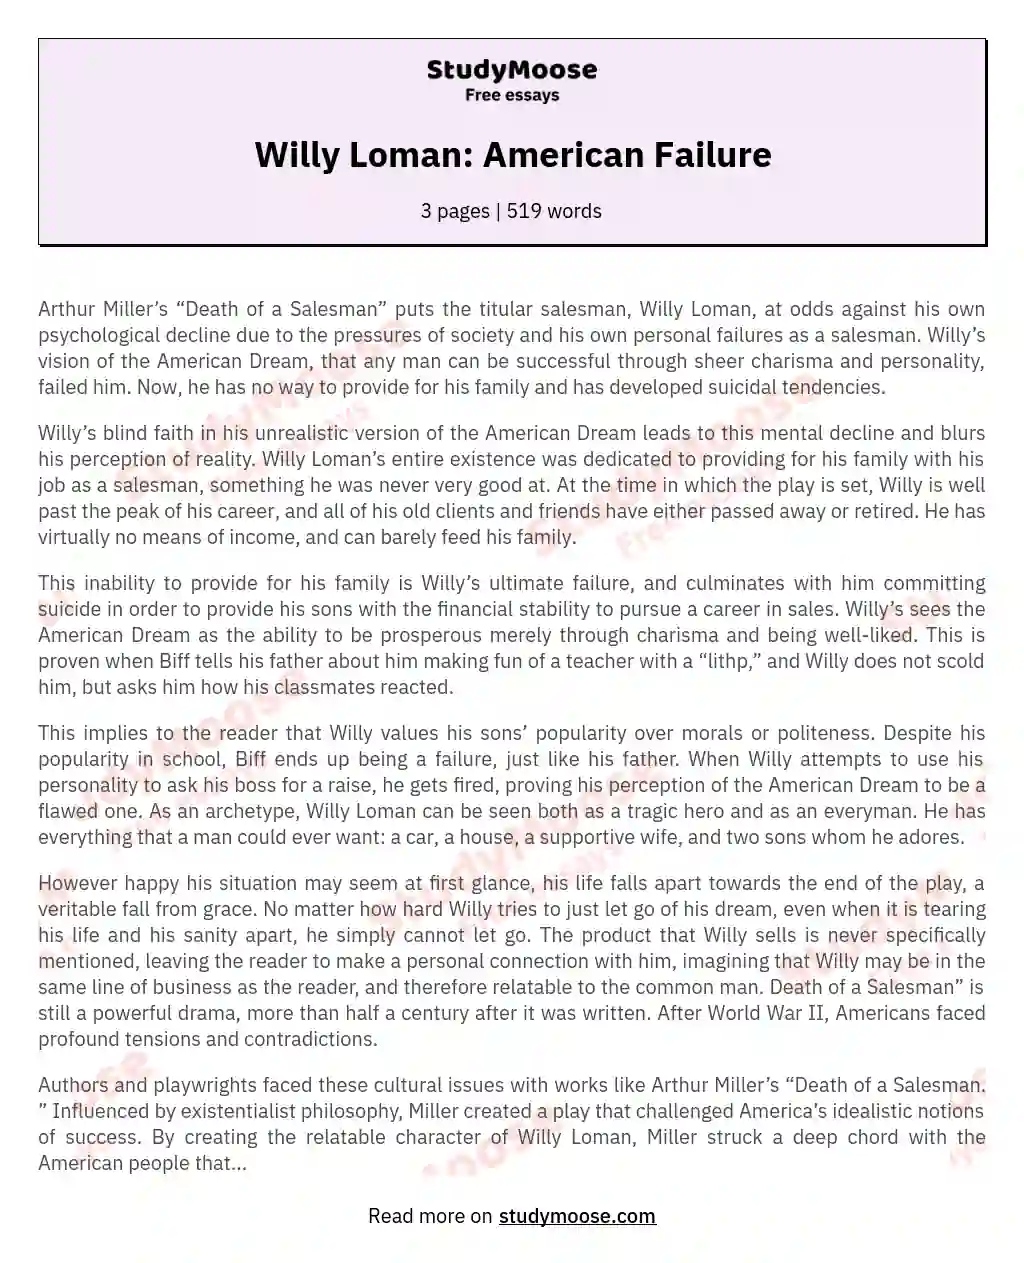 Willy Loman: American Failure